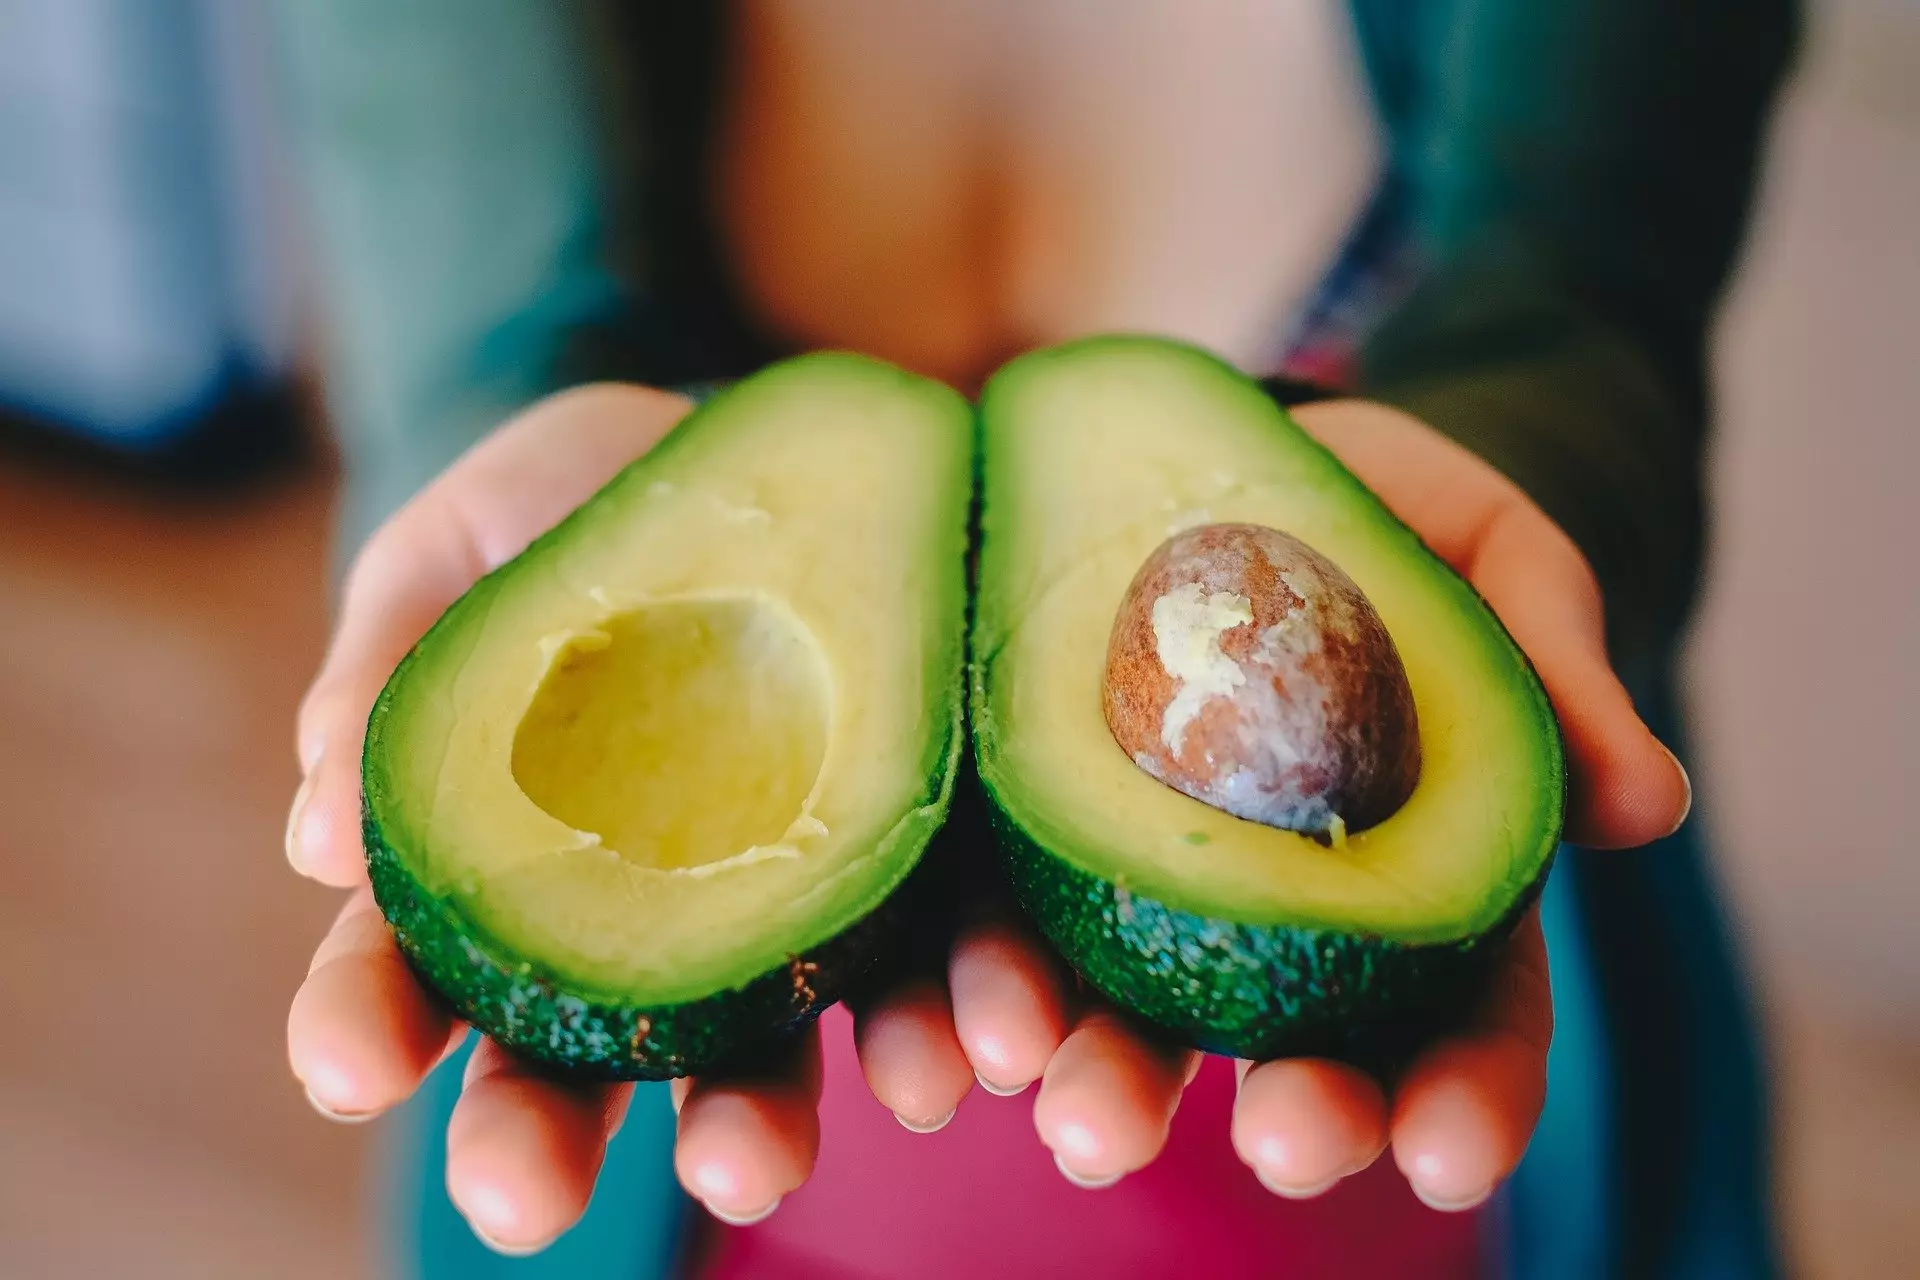 There's no need to cut your avocado in half with this clever hack (